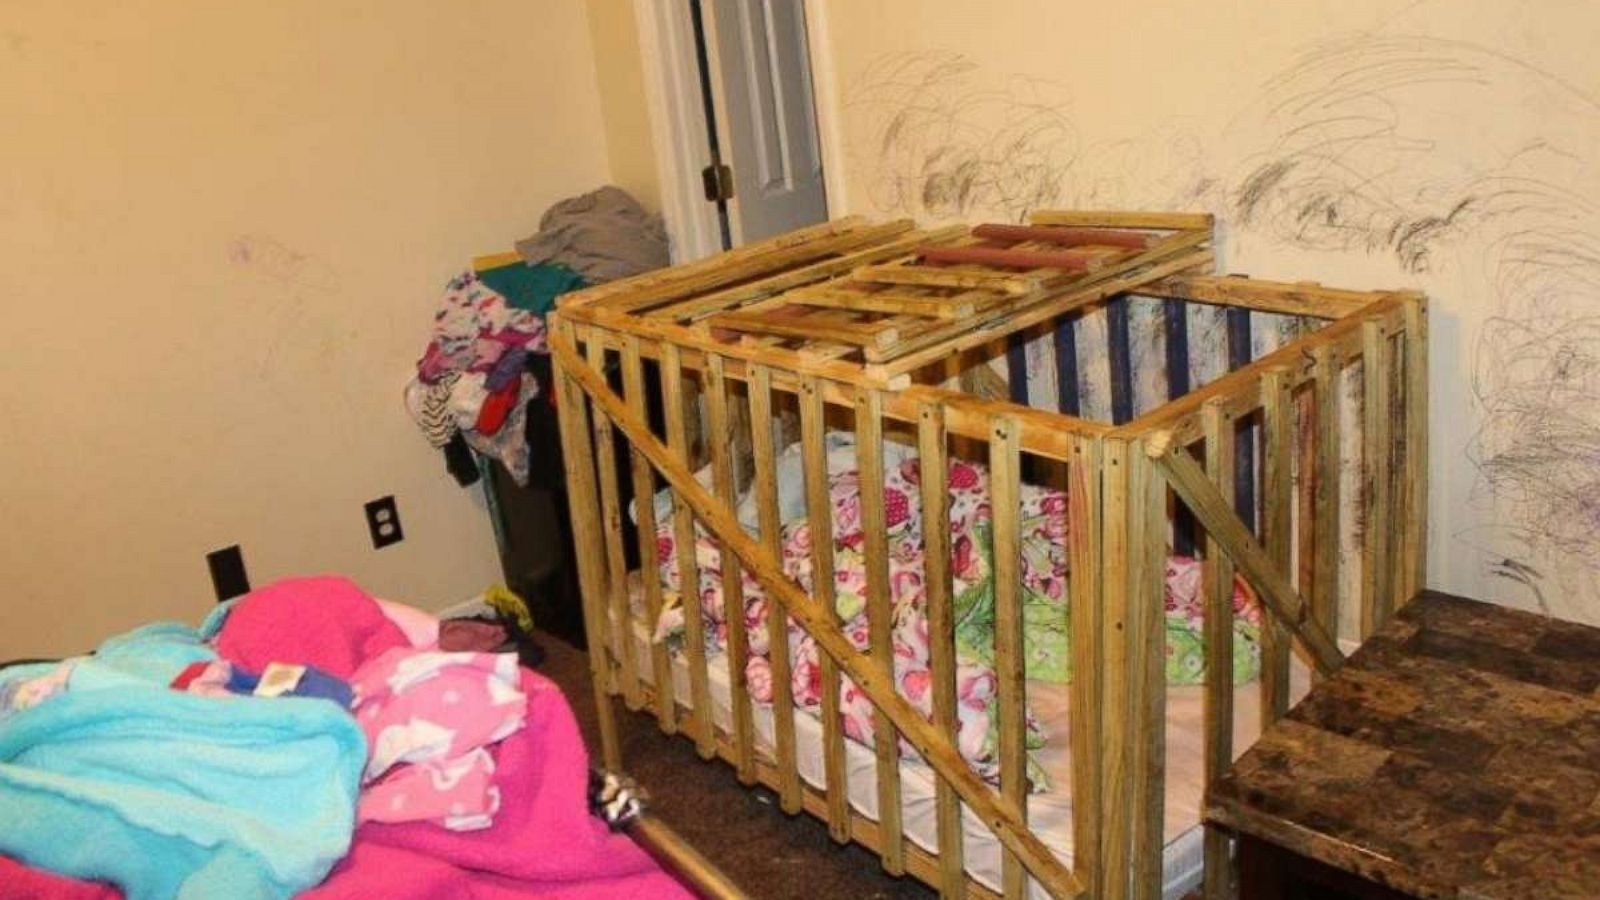 5 children removed from family home after allegedly being in cages -